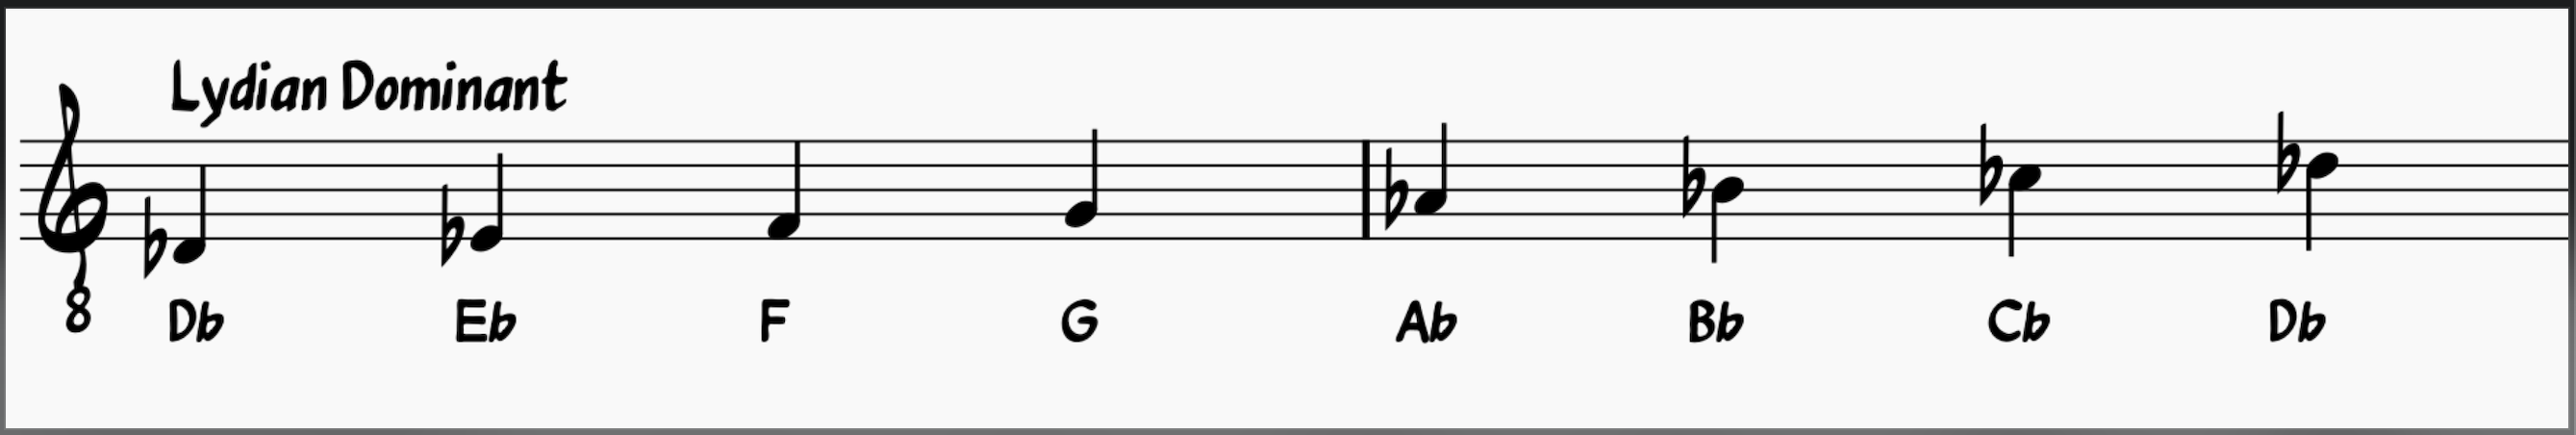 Chord Substitution: Scales You Can Use Over Altered Dominant Chords: Lydian Dominant